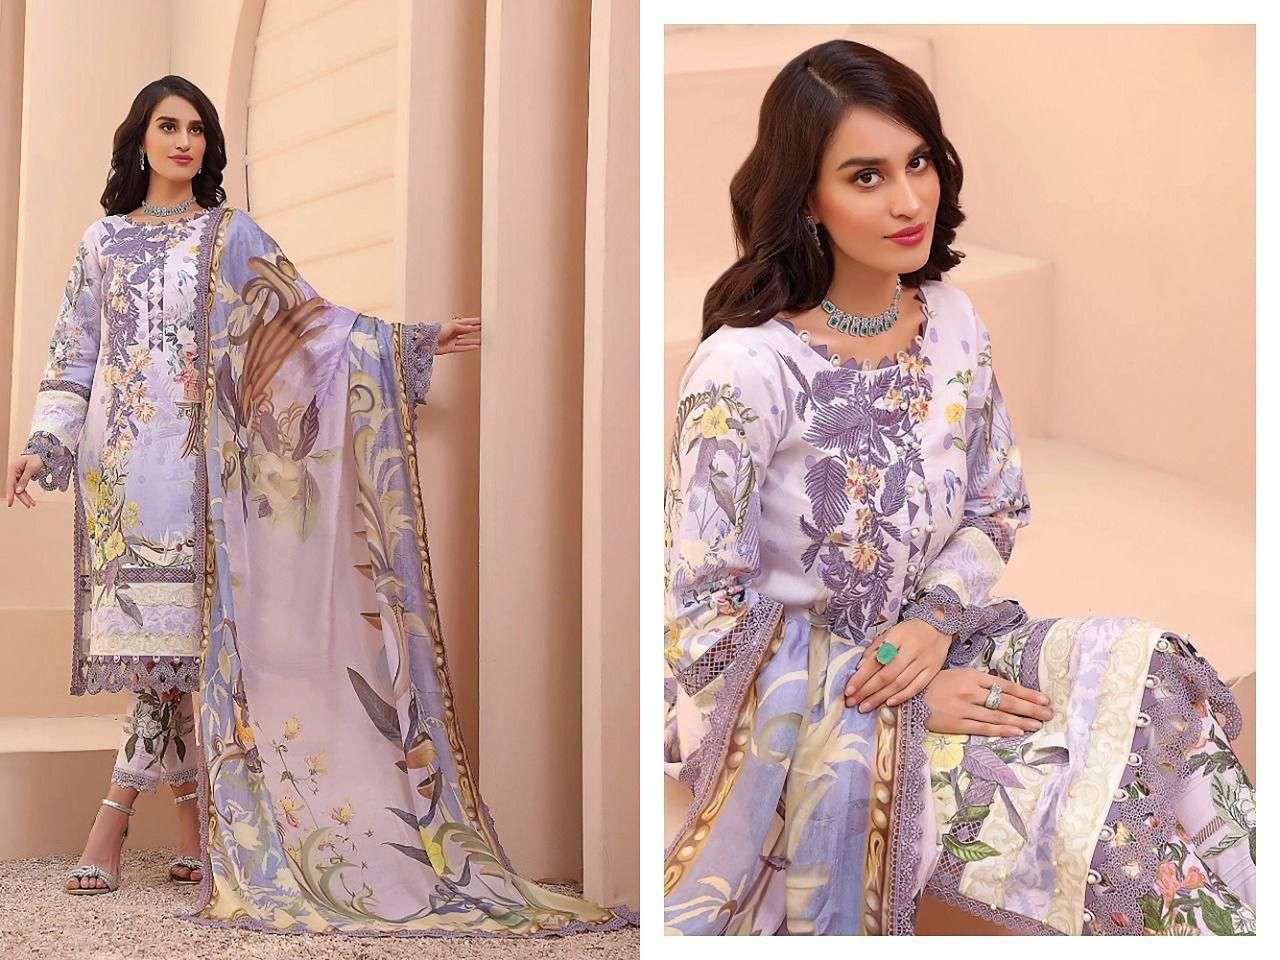 RAZIA SULTAN VOL-36 BY APANA COTTON 1001 TO 1008 SERIES BEAUTIFUL SUITS STYLISH FANCY COLORFUL CASUAL WEAR & ETHNIC WEAR COTTON PRINTED DRESSES AT WHOLESALE PRICE